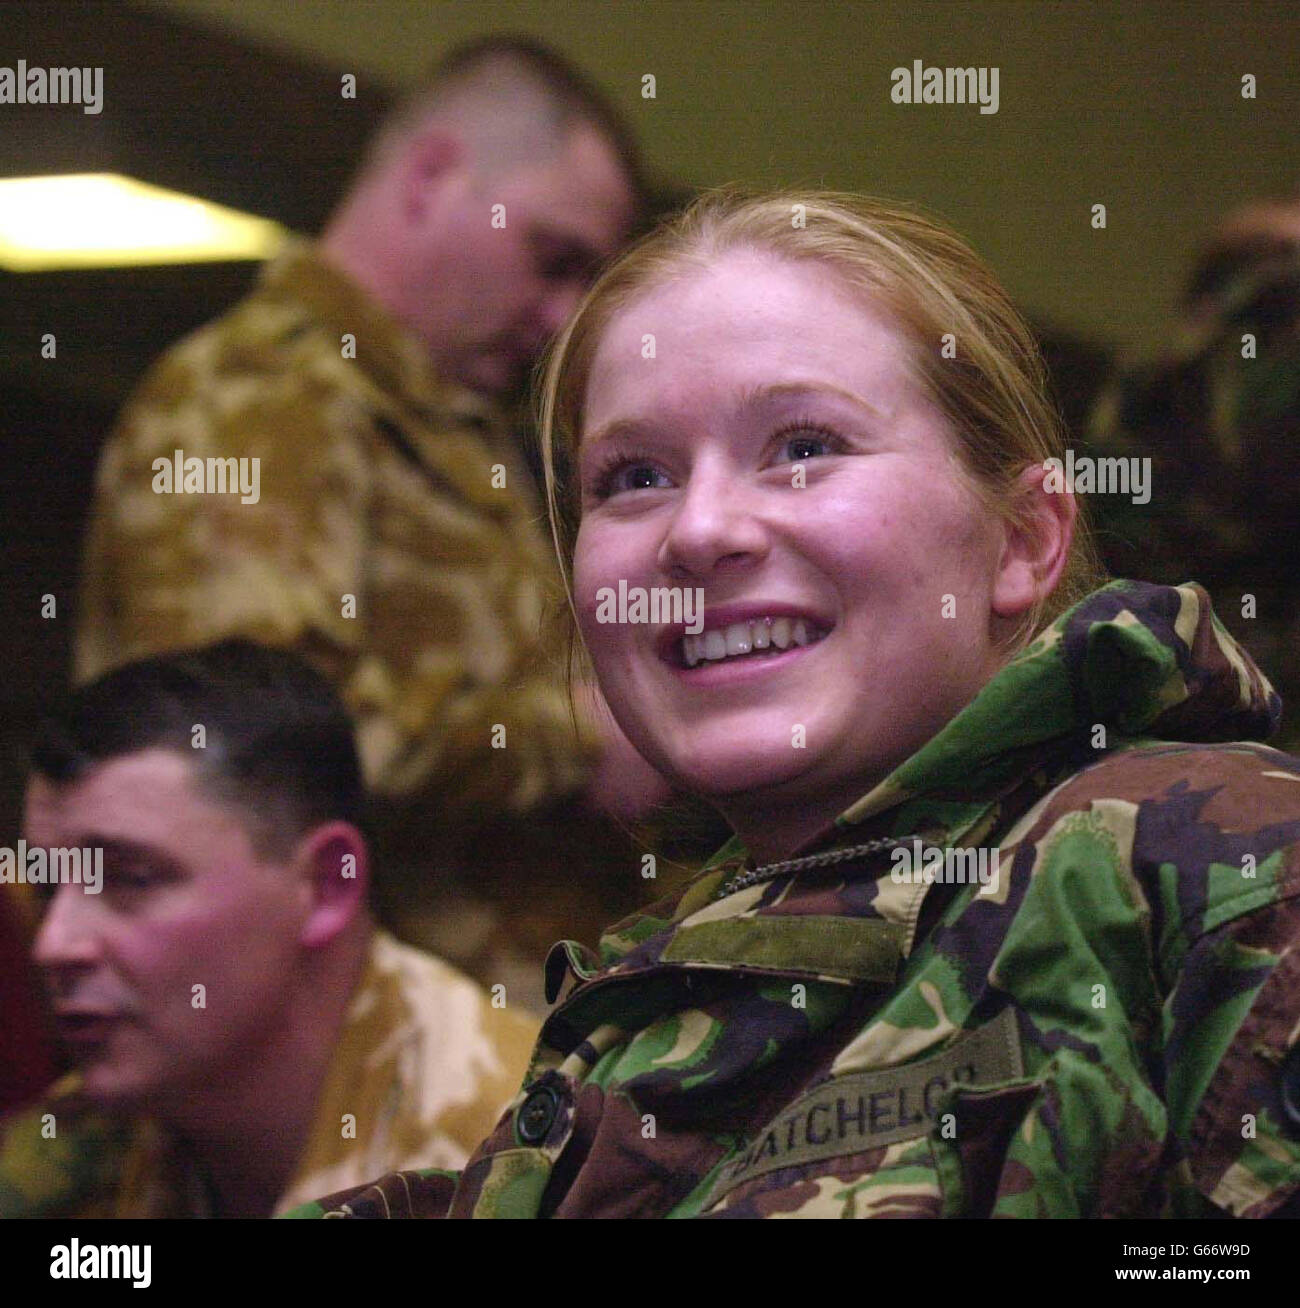 Sgt Kelly Batchelor, 24, from Eastbourne, waits with other soldiers, including members of 16 Air Assault Brigade, in a departure lounge at RAF Brize Norton in Oxfordshire before heading for the Gulf aboard a Tristar passenger aircraft. * They will be joining British forces in the region deployed ahead of possible military action againgst Iraq. Stock Photo